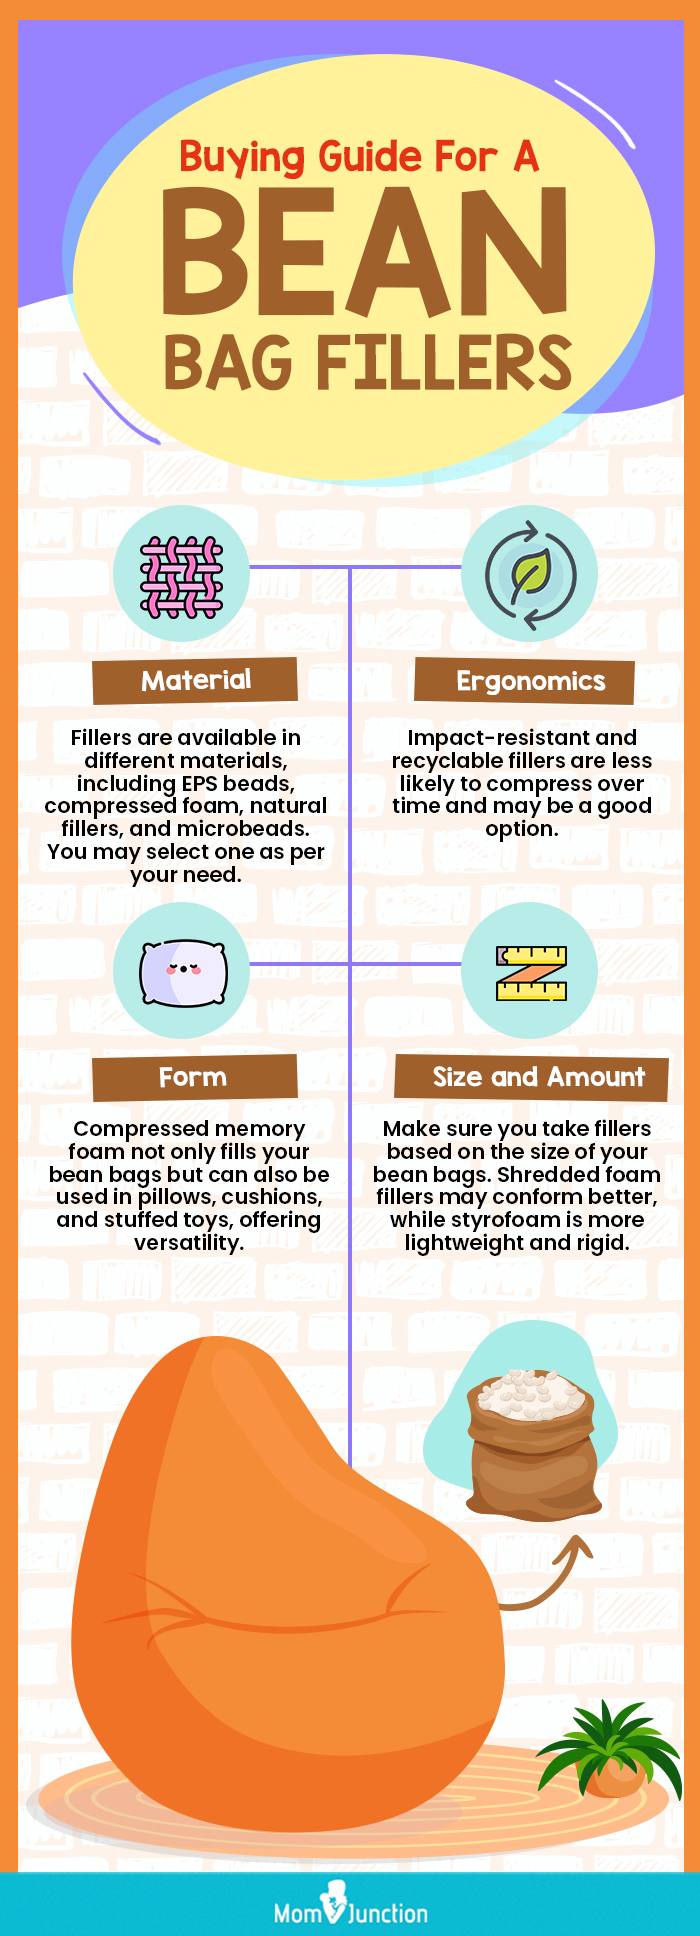 Buying Guide For A Bean Bag Filler (infographic)